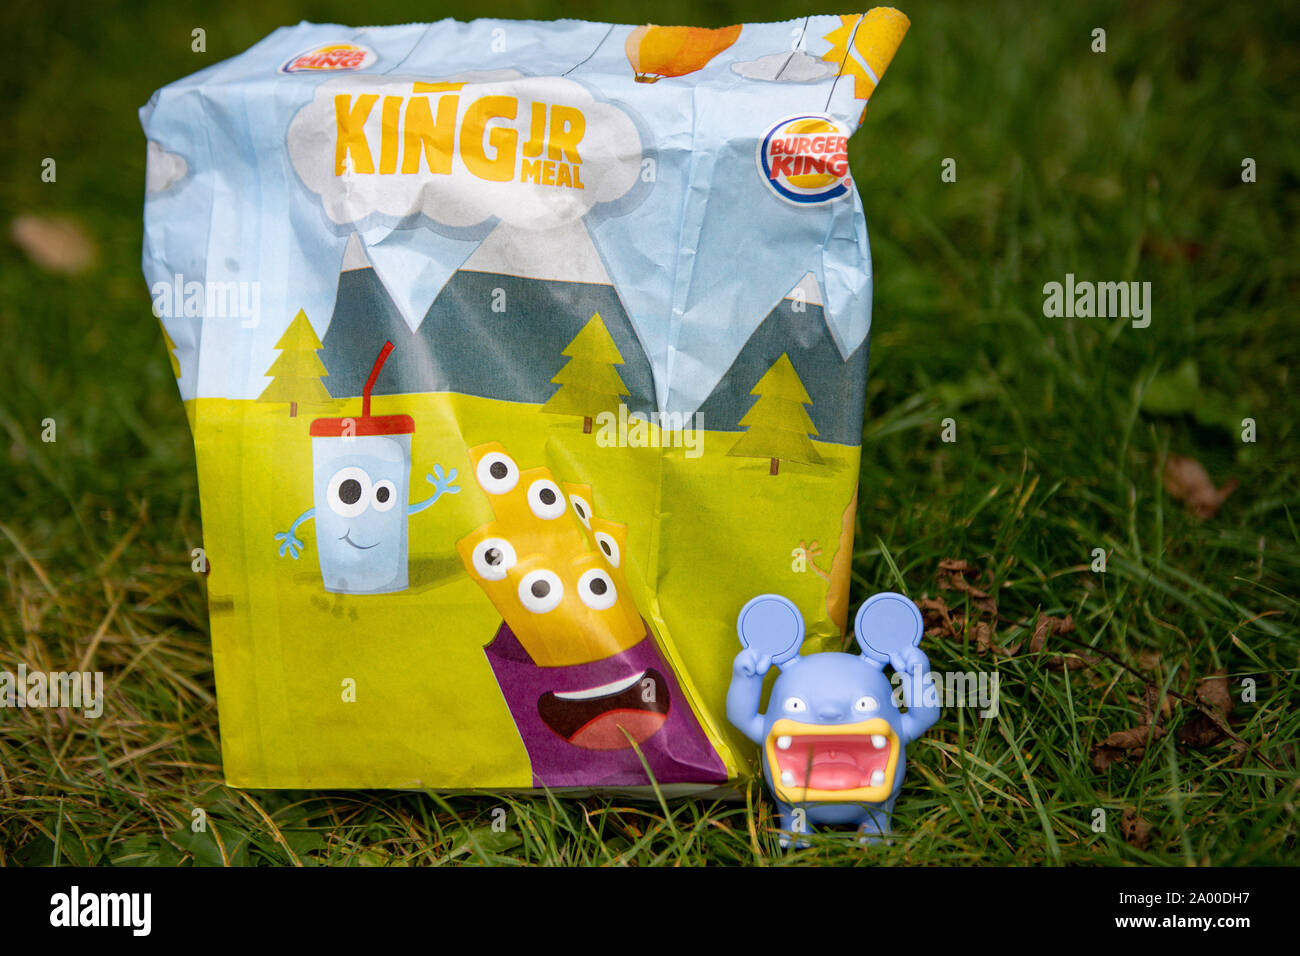 A Burger King toy from one of their children's meals. The fast food chain has announced that they are removing all plastic toys from its children's meals served in the UK from Thursday to save an estimated 320 tonnes of waste annually. Stock Photo